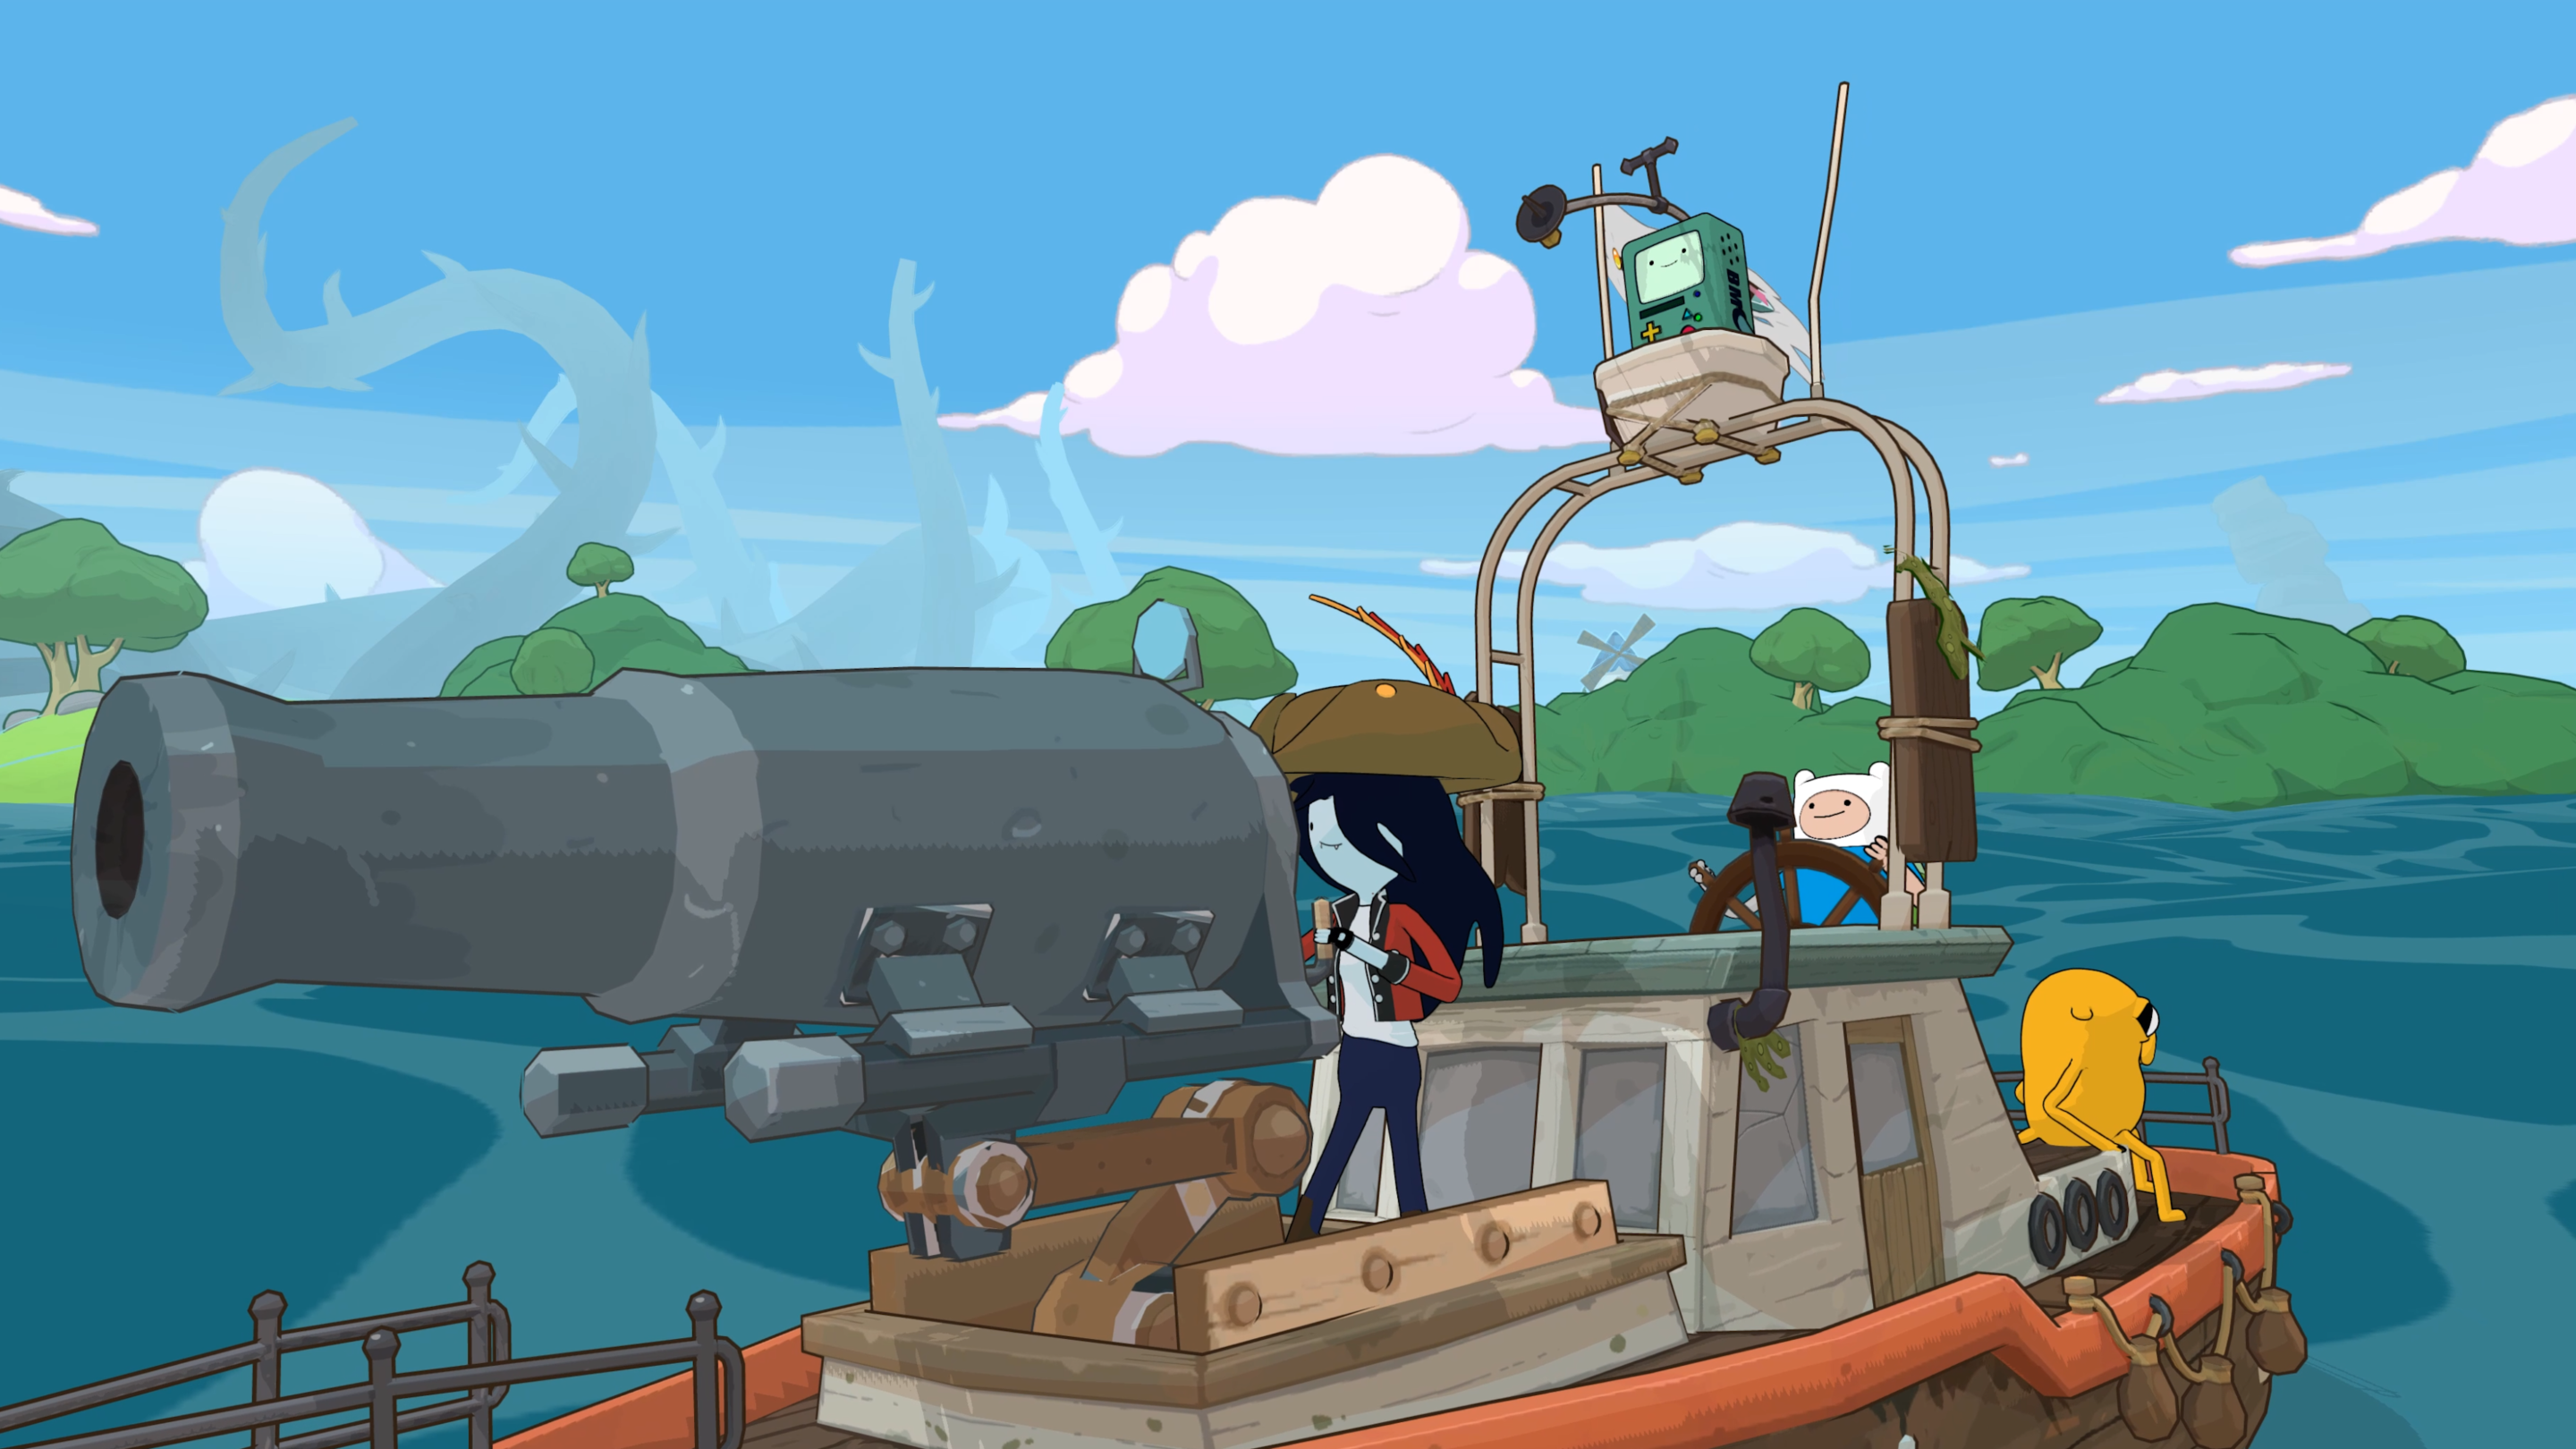 adventure-time-gets-an-open-world-pirate-game-but-it-won-t-be-good-ekgaming